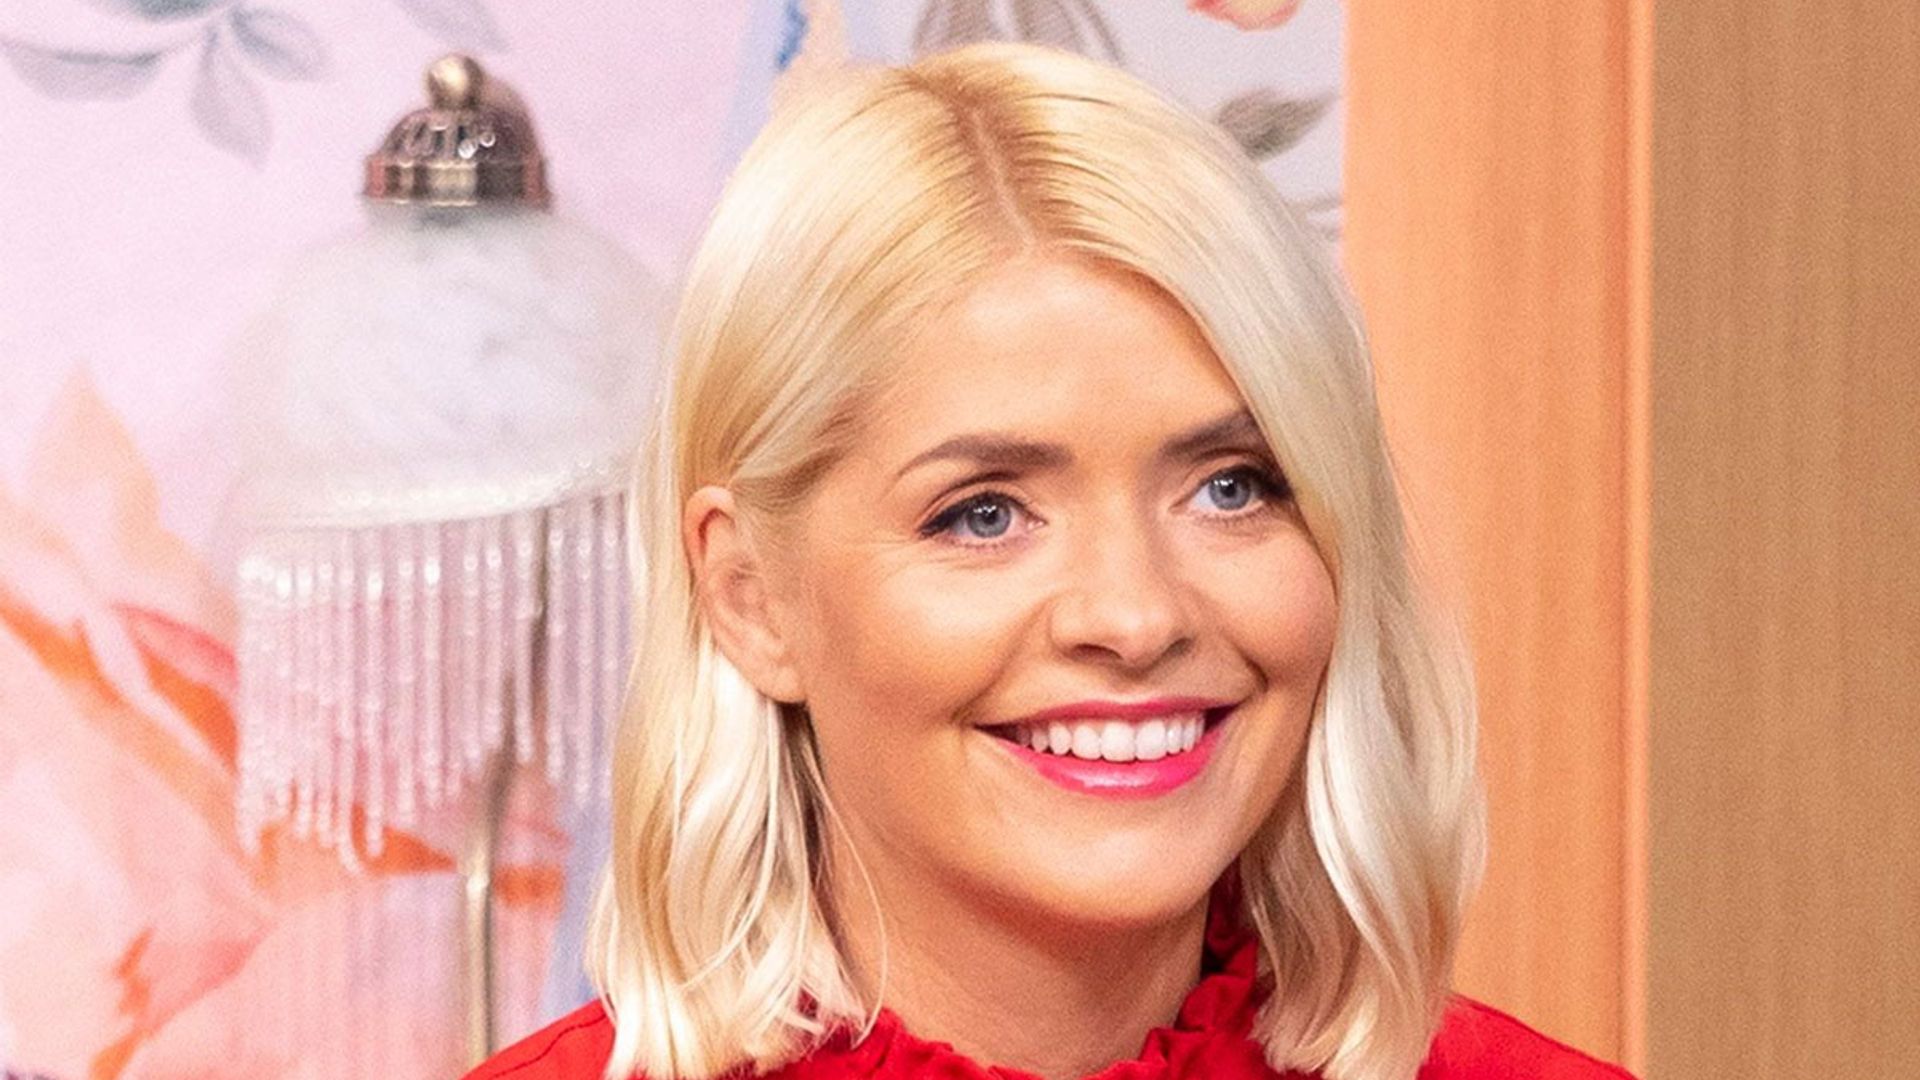 holly willoughby red dress this morning